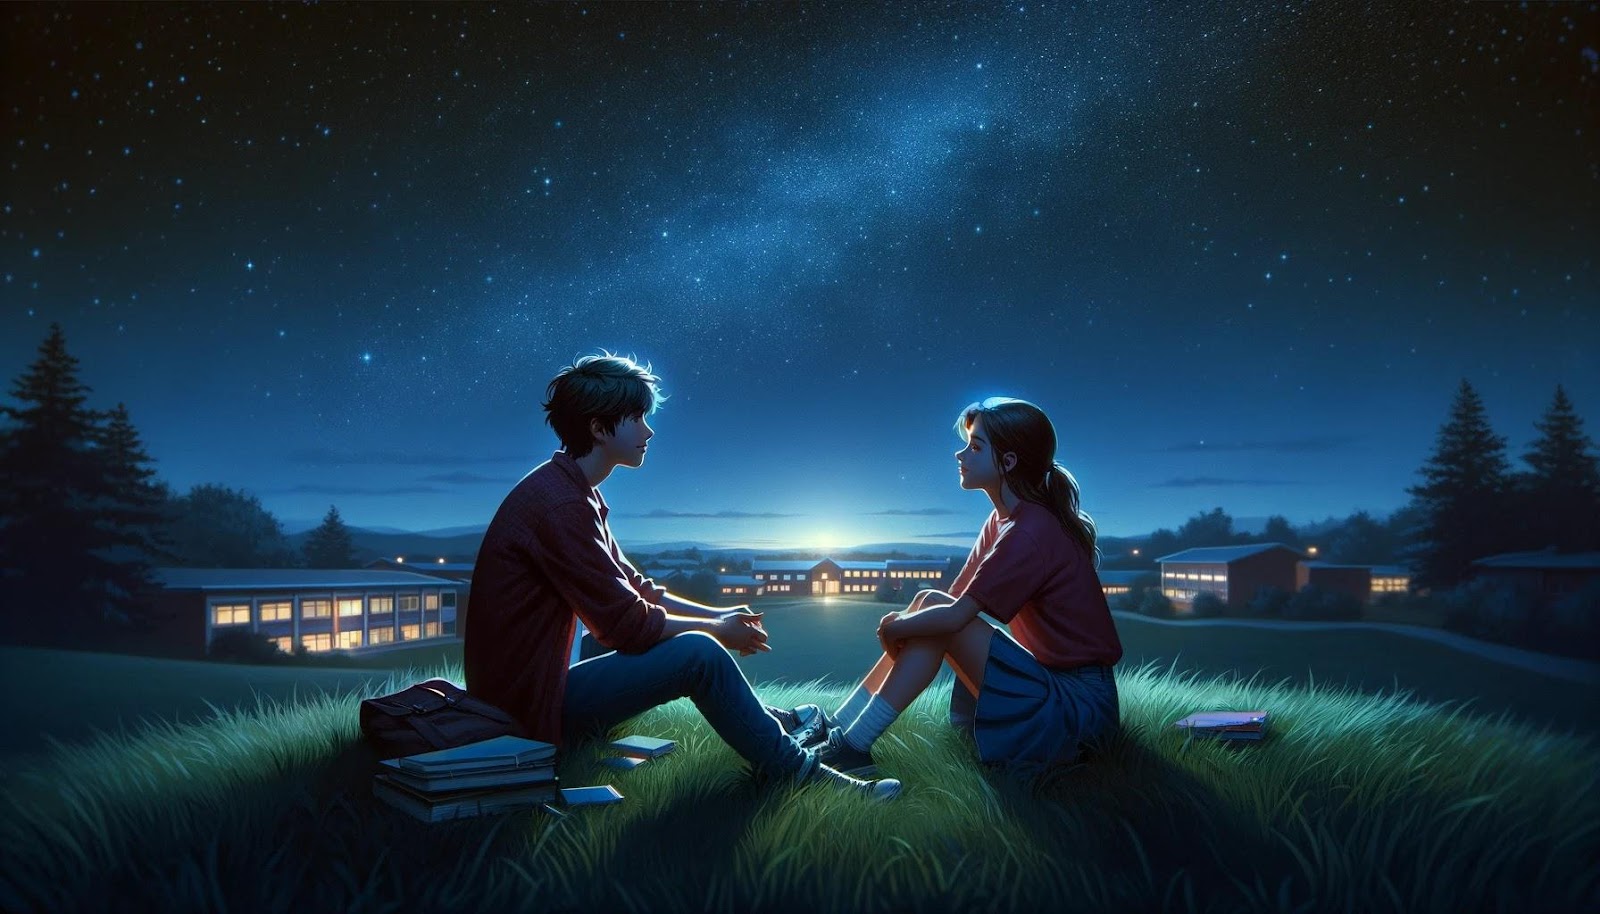 In a more intimate setting, this image portrays two teenagers sharing a quiet conversation under a starry sky, seated on a grassy hill overlooking their school. The night sky adds a layer of intimacy and wonder to the scene, symbolizing the deepening connection between the pair. Their side-by-side pose suggests mutual respect and interest, capturing the magical moments that can arise from the journey of winning over a school crush.